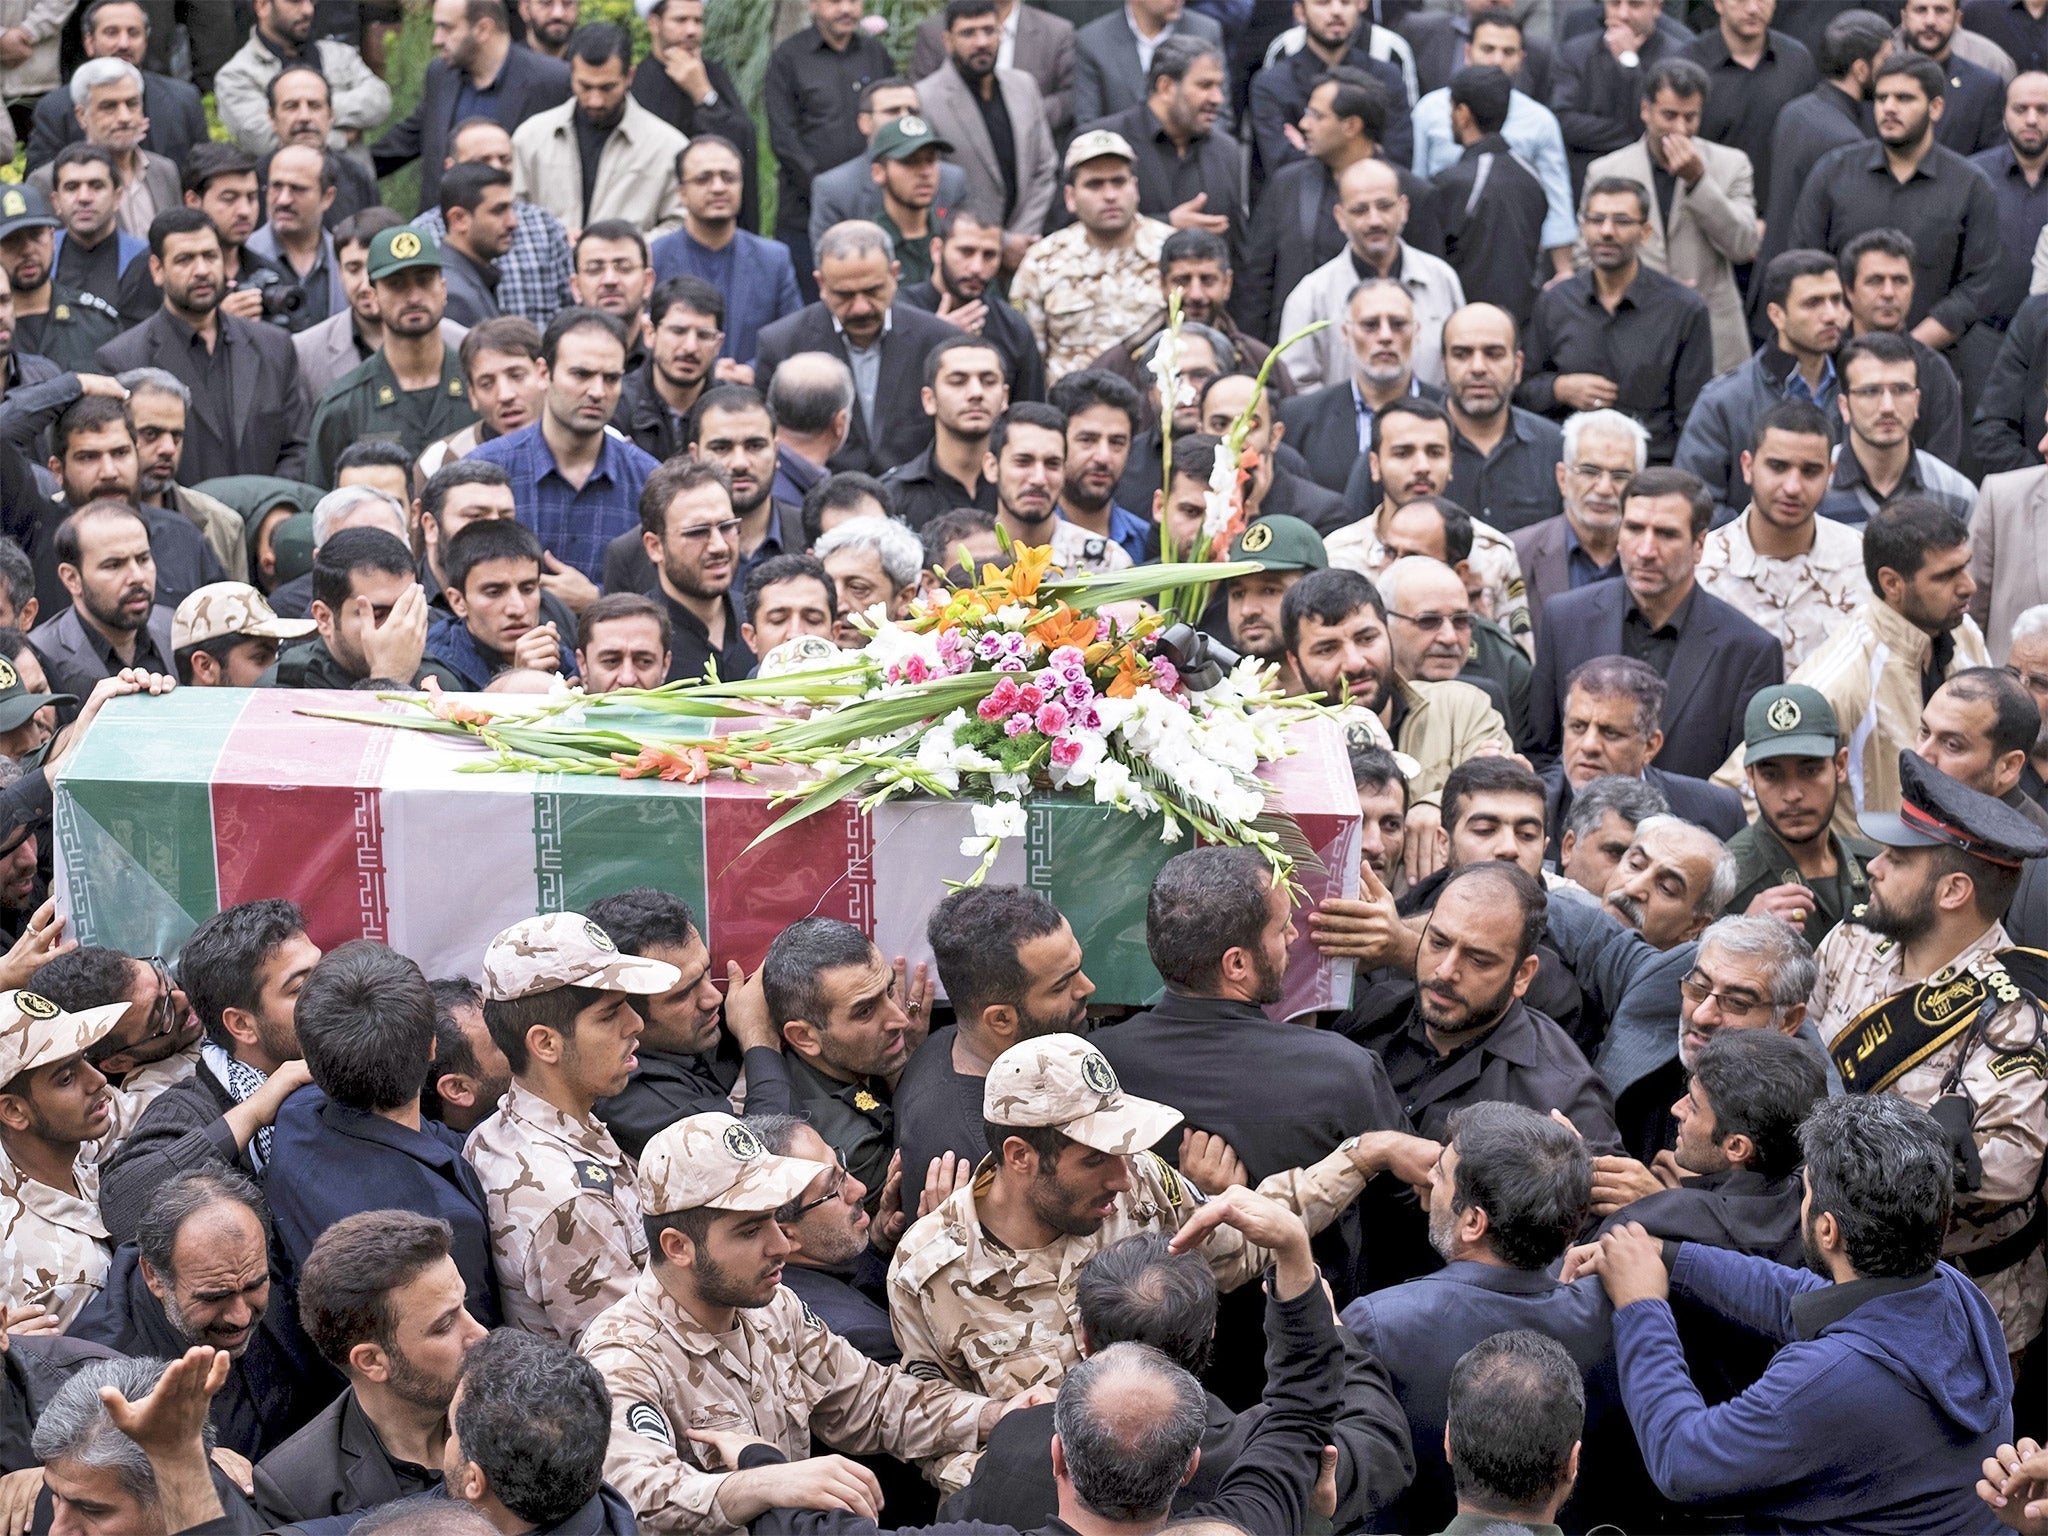 Mourners fill a Tehran street for the funeral of Abdollah Bagheri, a bodyguard of former Iranian President Mahmoud Ahmadinejad. Mr Bagheri was reportedly killed while guarding a shrine in Aleppo, Syria